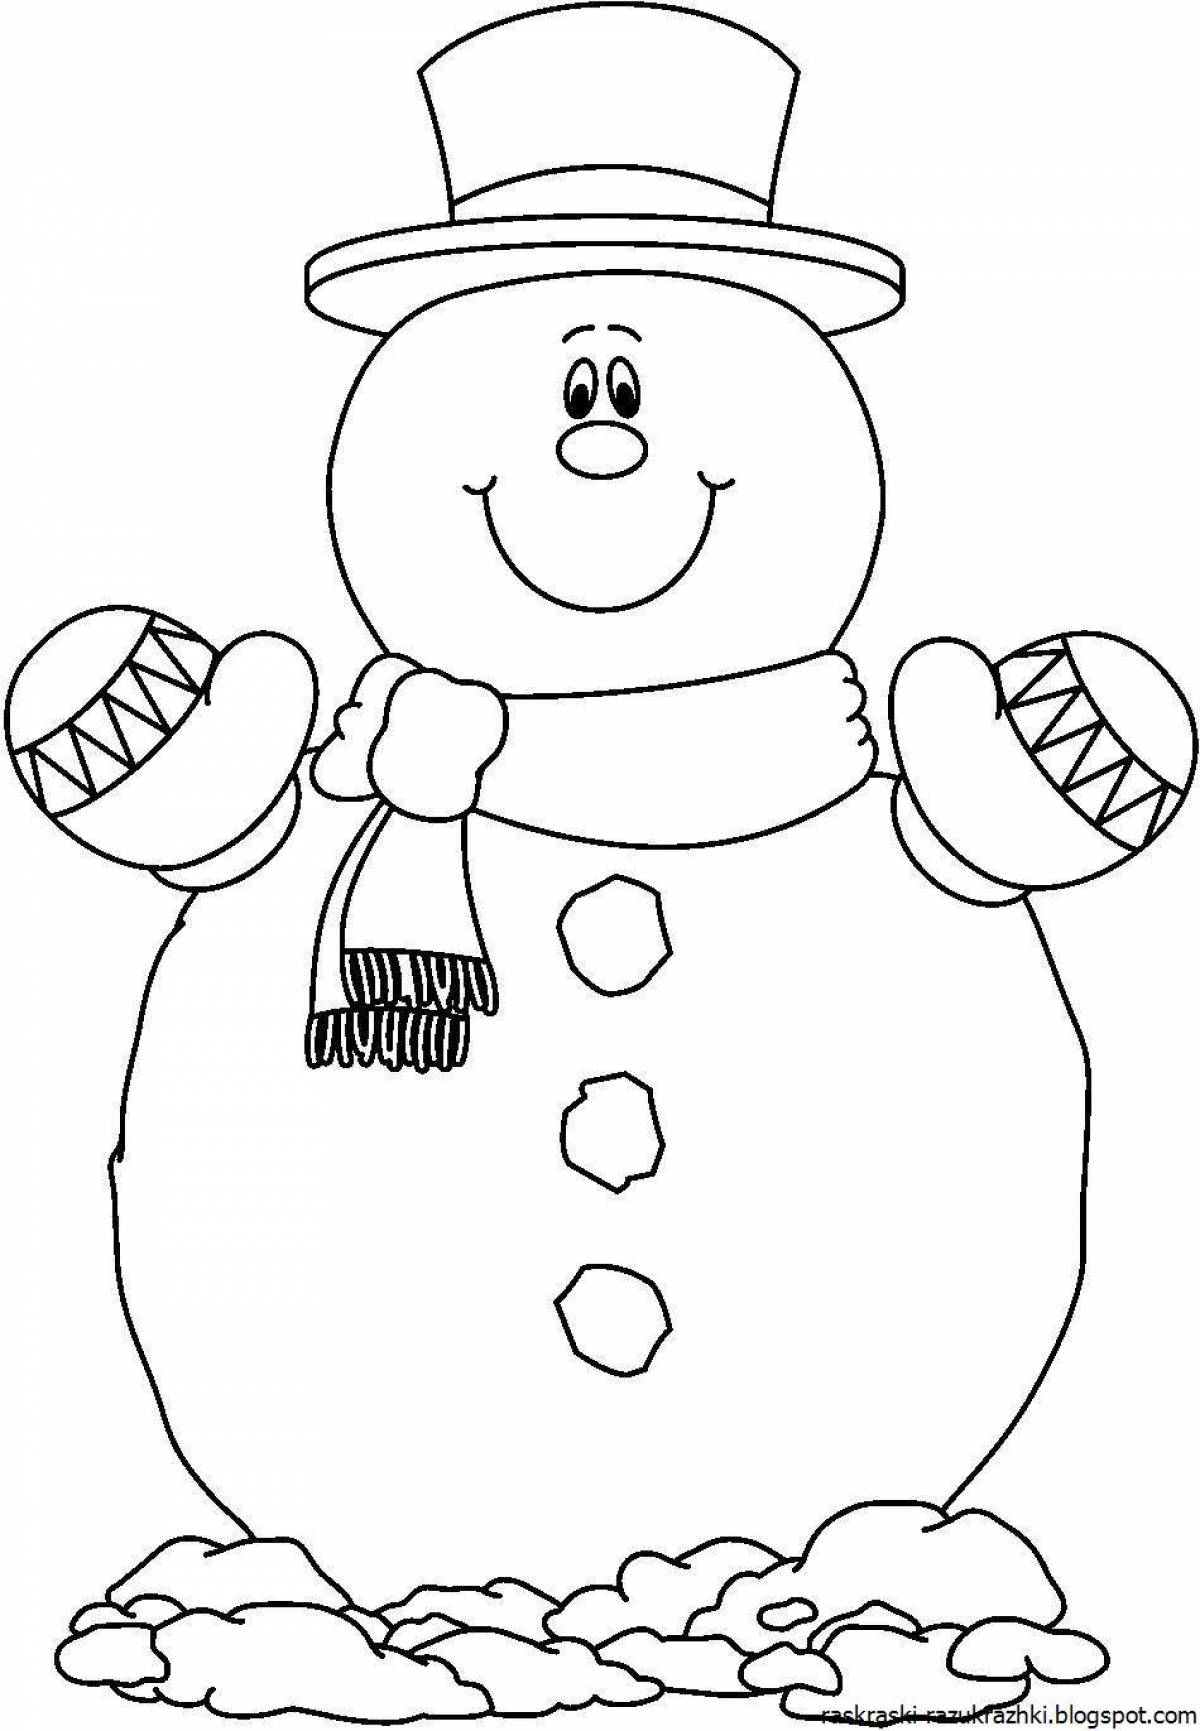 Beautiful snowman coloring page for kids